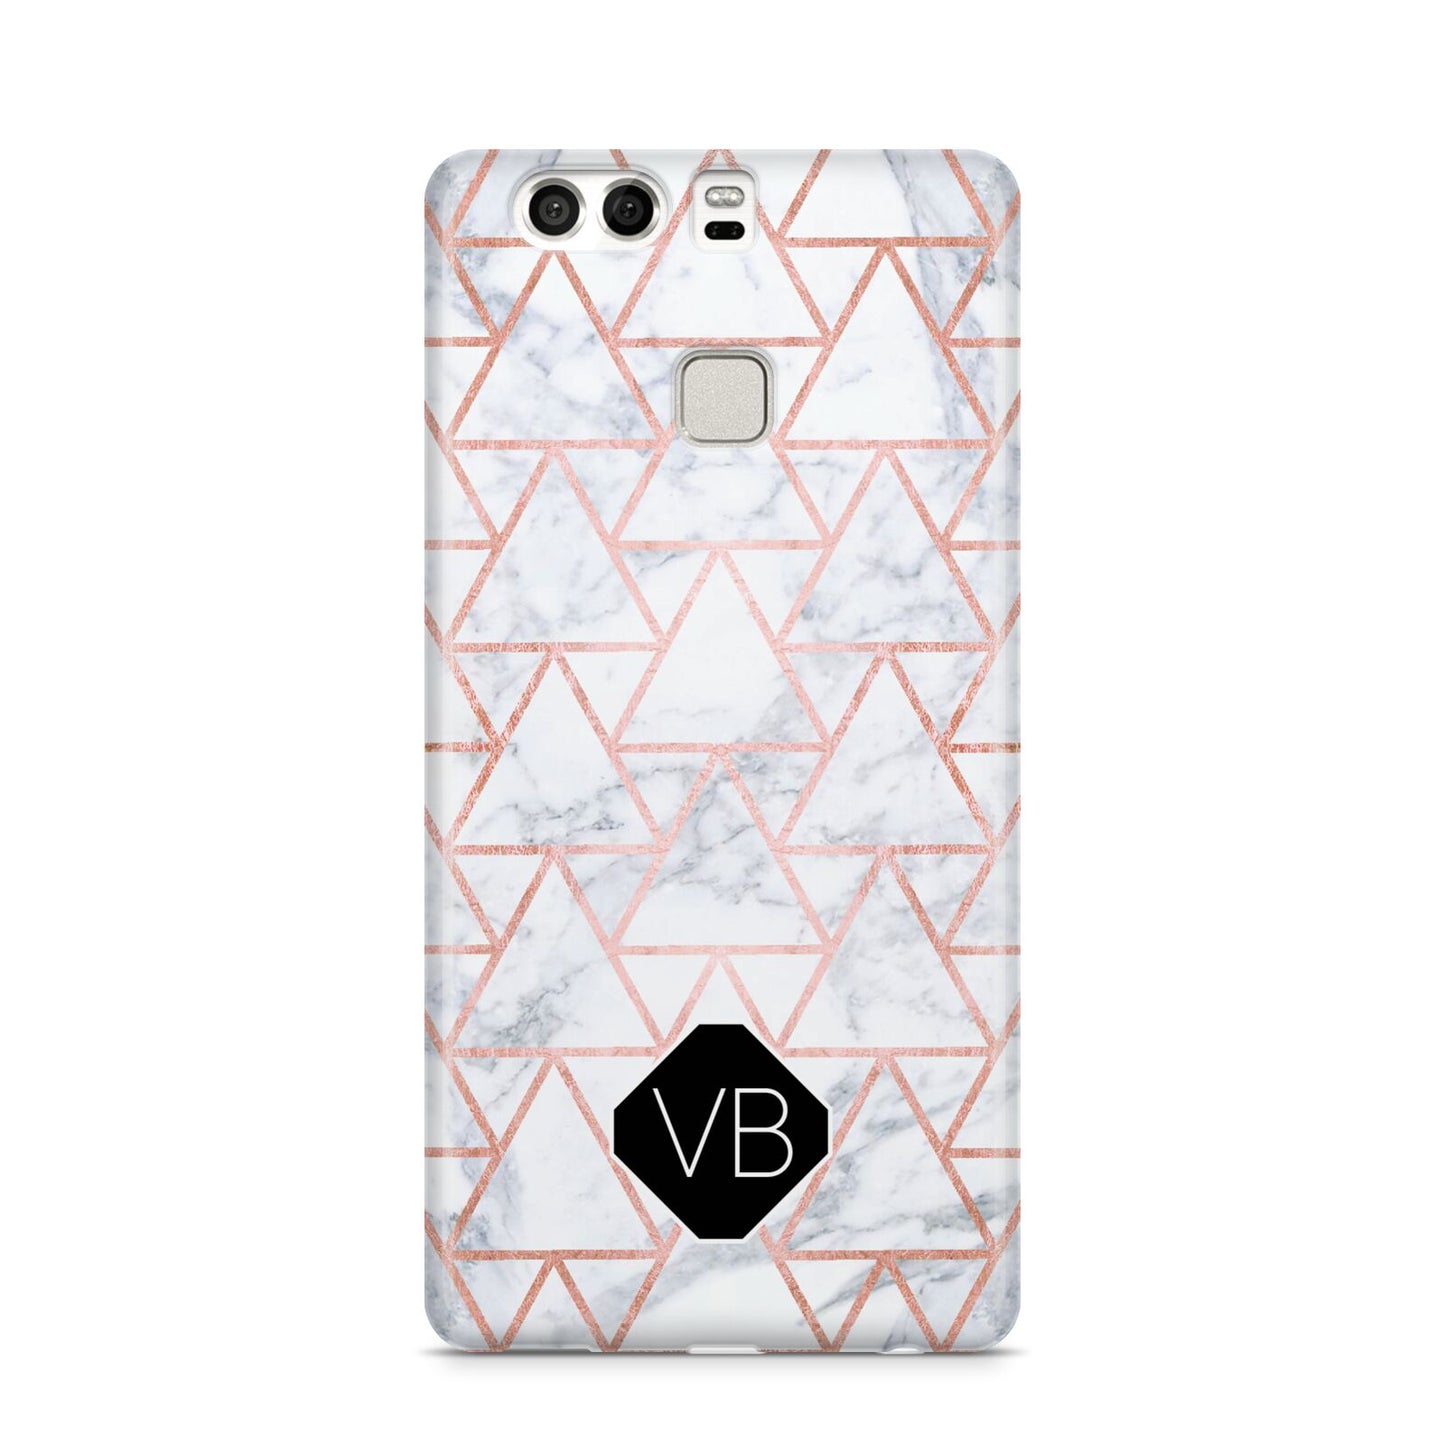 Personalised Rose Gold Grey Marble Hexagon Huawei P9 Case